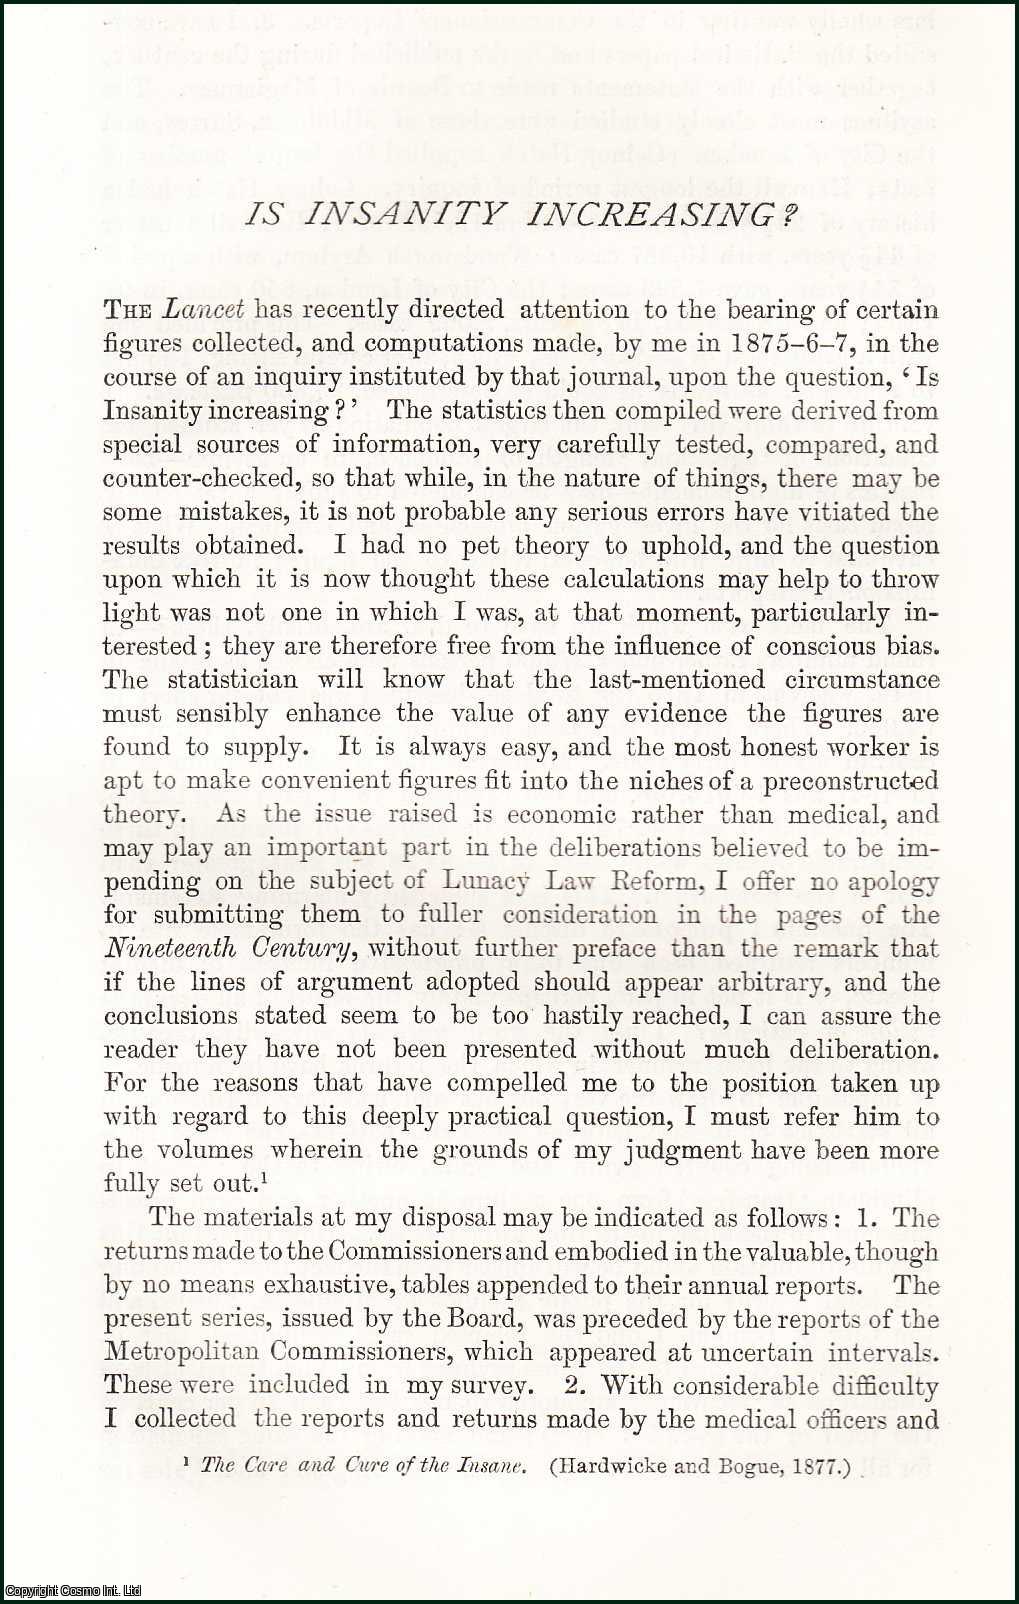 W.E. Gladstone - Is Insanity Increasing? An original article from the Nineteenth Century Magazine, 1879.